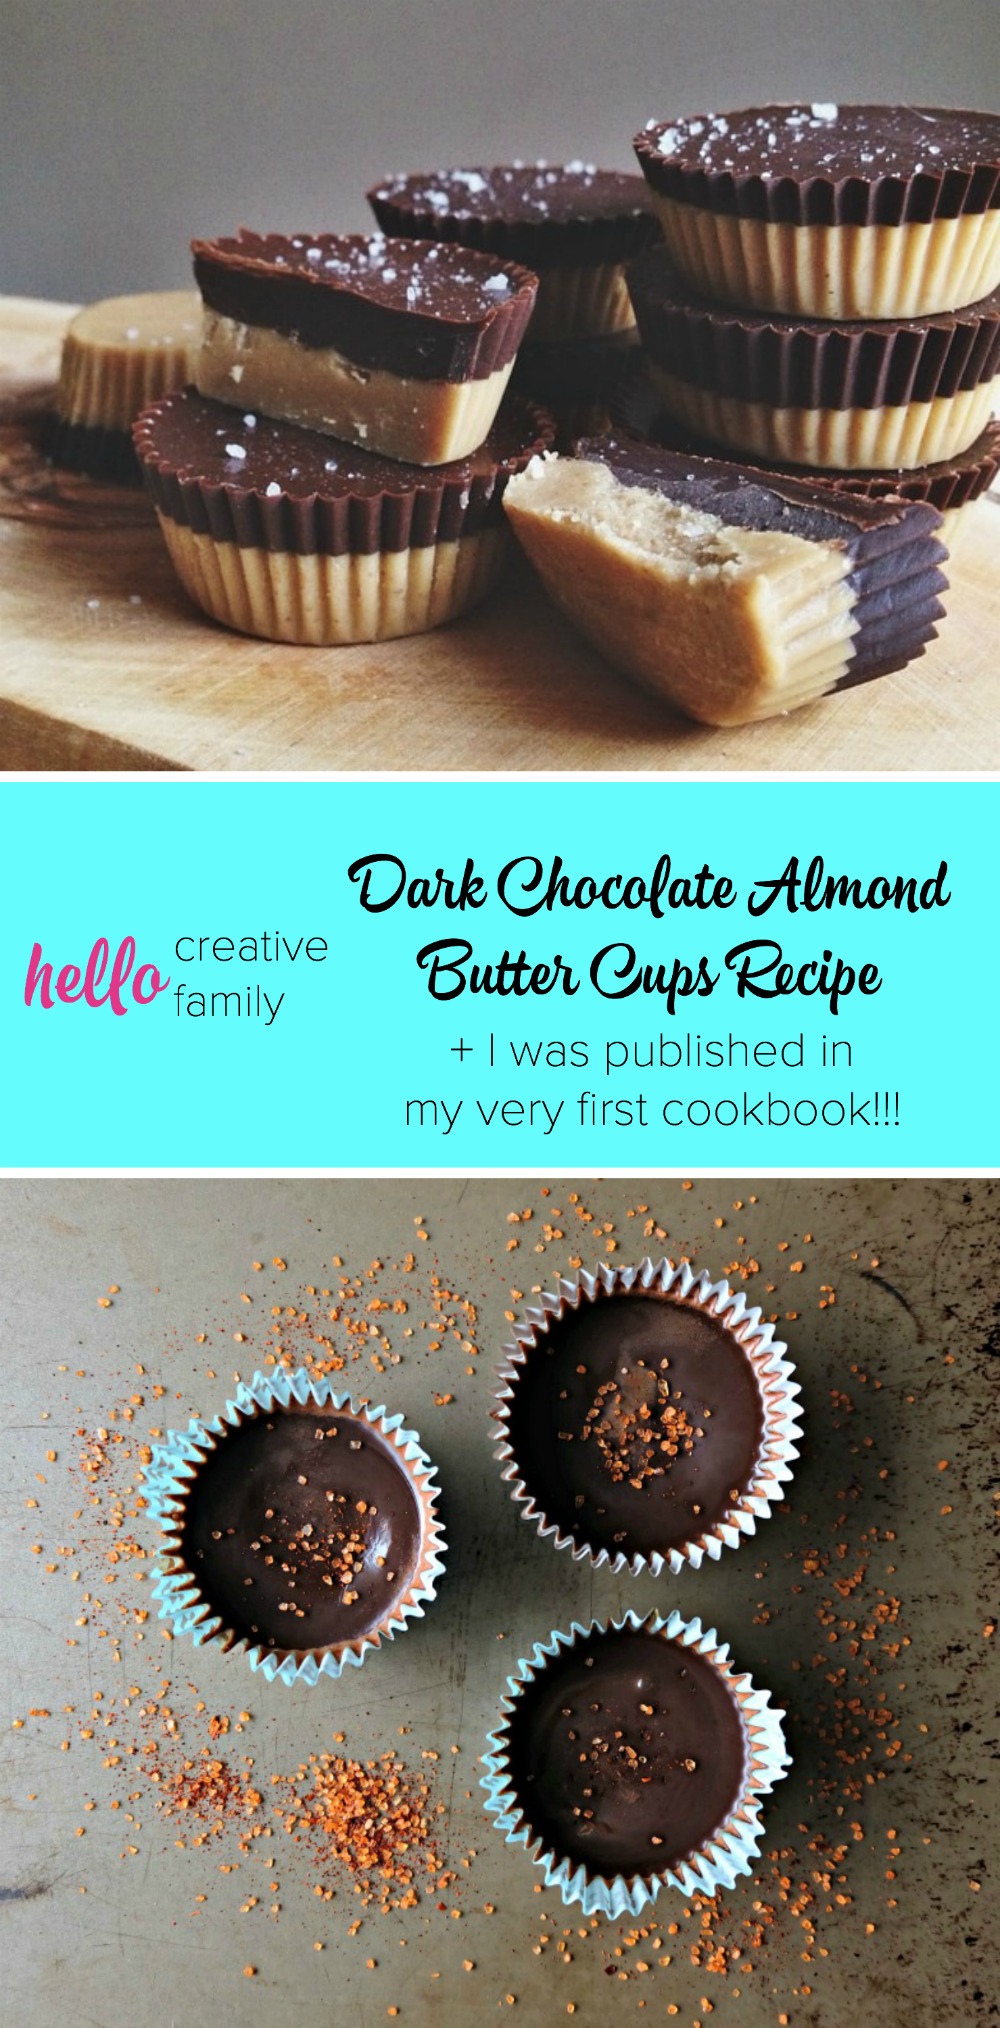 Every kitchen needs a delicious chocolate dessert recipe! This one is making me drool! Gluten free, dairy free and paleo friendly, this whole foods, healthy dessert idea is sure to be a hit! Dark chocolate almond butter cups recipe. PS. You could sub sunbutter or peanut butter!